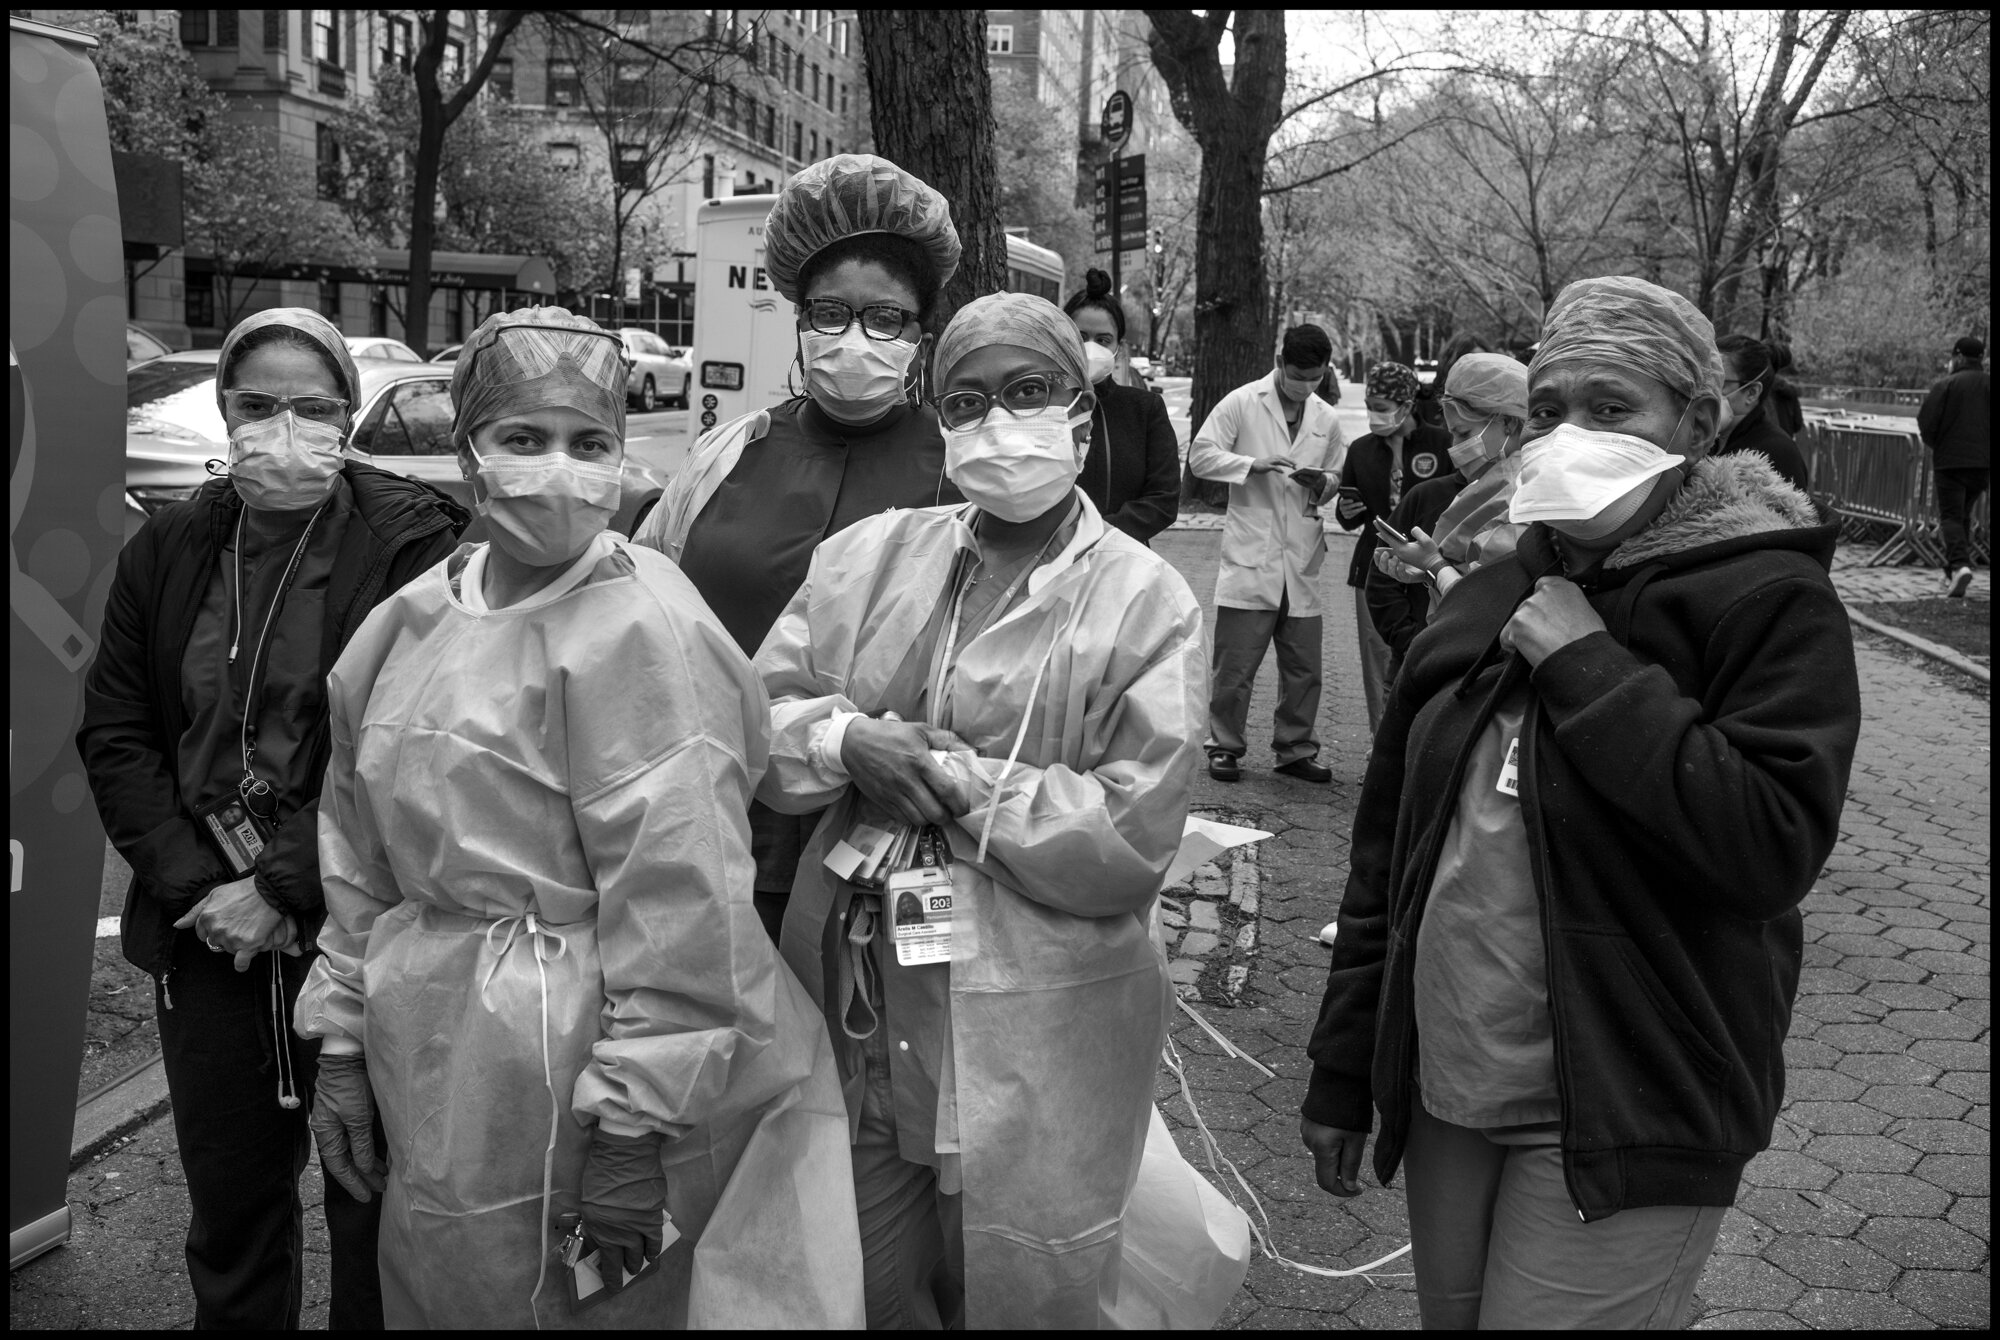  Antonia, Alicia, Arelis, and Jellene are nurses, all involved in treating coronavirus patients at Mount Sinai Hospital in New York.   April 17, 2020. © Peter Turnley  ID# 23-004 